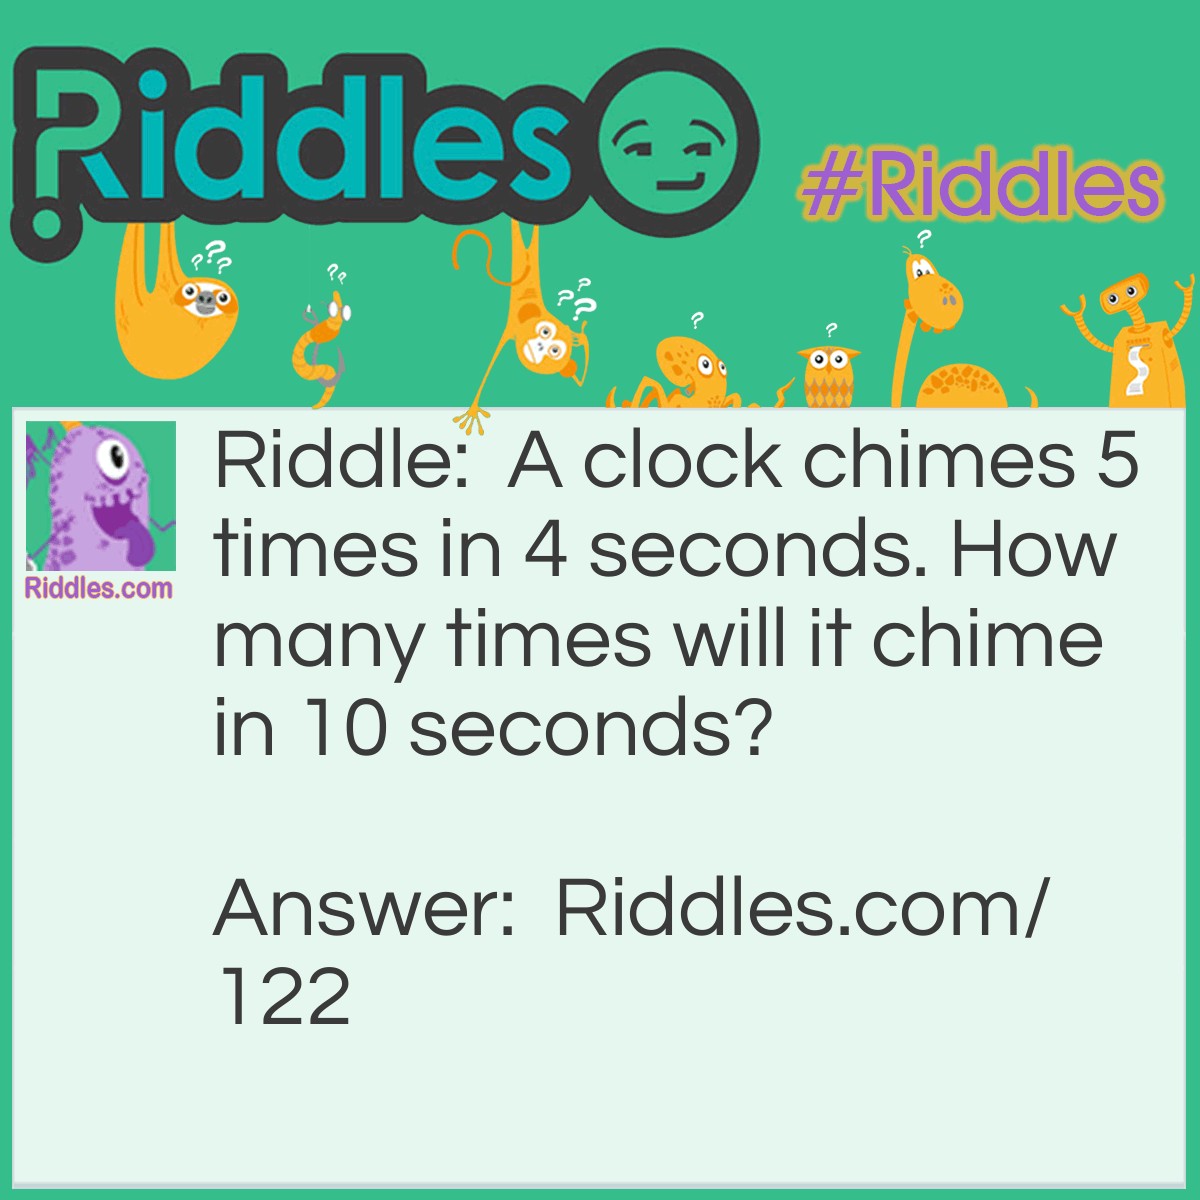 Riddle: A clock chimes 5 times in 4 seconds. How many times will it chime in 10 seconds? Answer: 11 times. It chimes at zero and then once every second for 10 seconds.